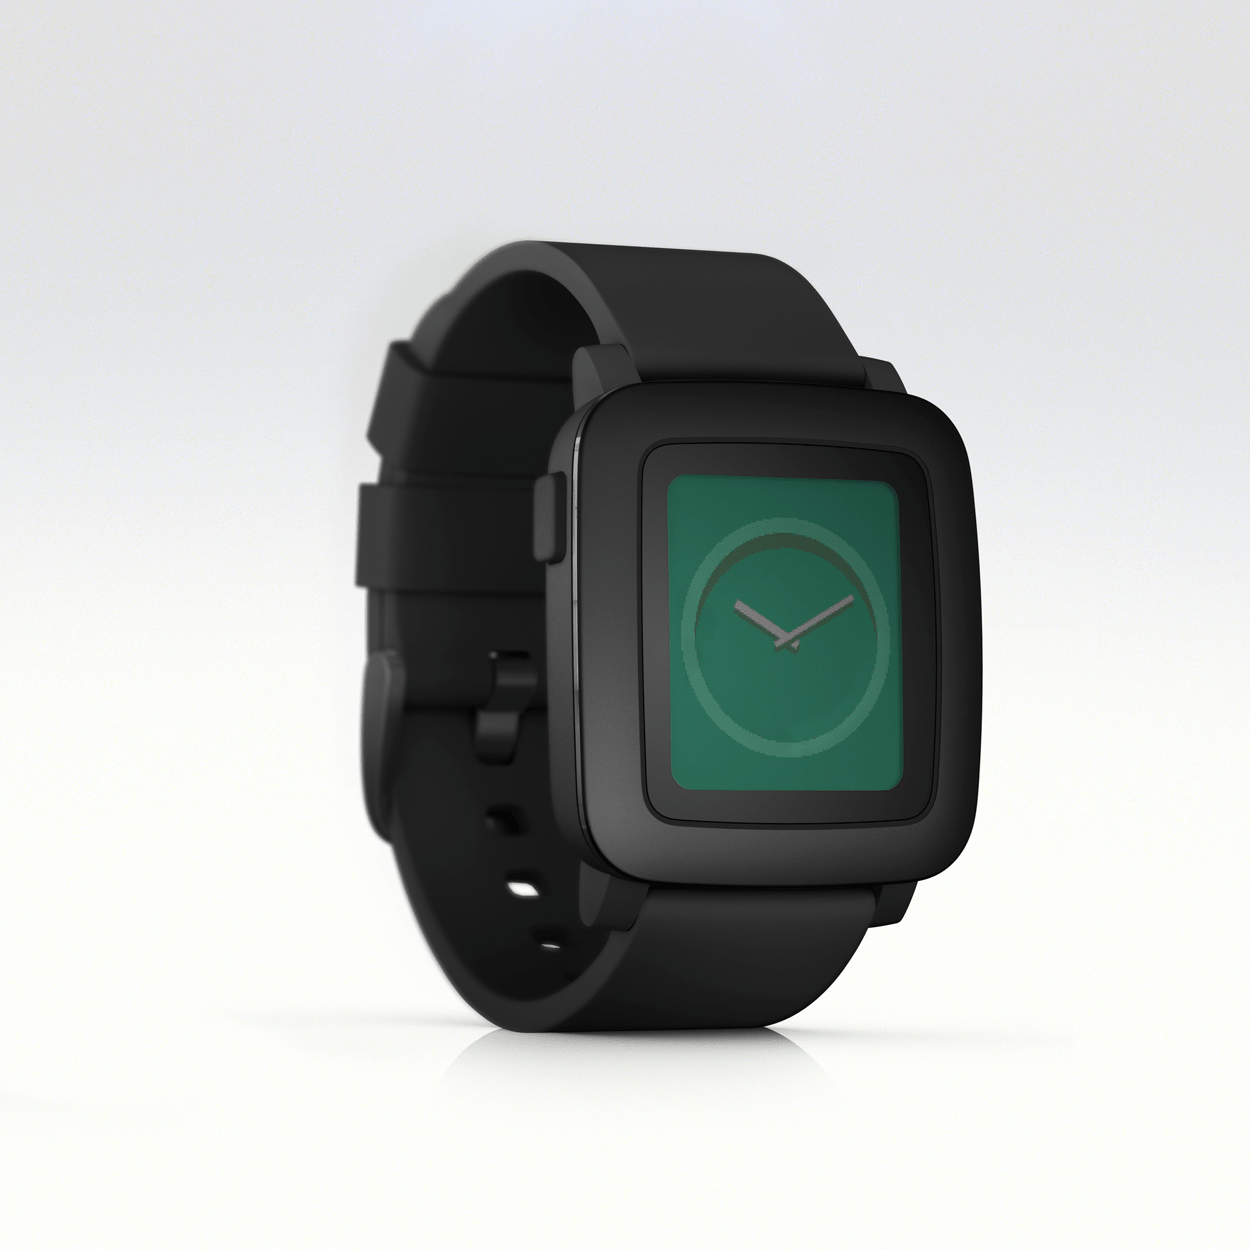 The Pebble Time in black